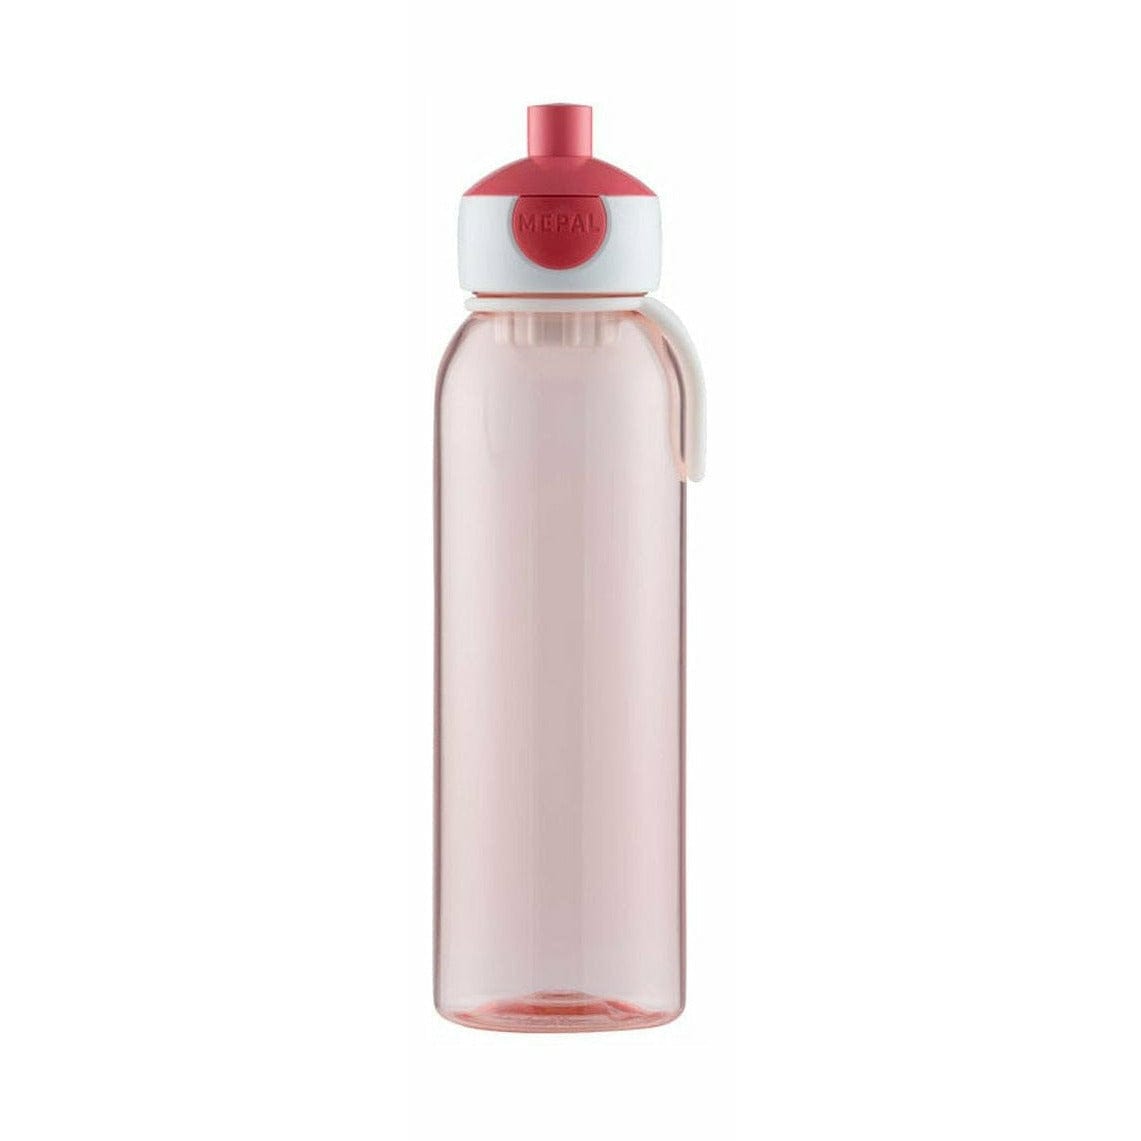 Mepal pop up water bouteille 0,5 L, rose